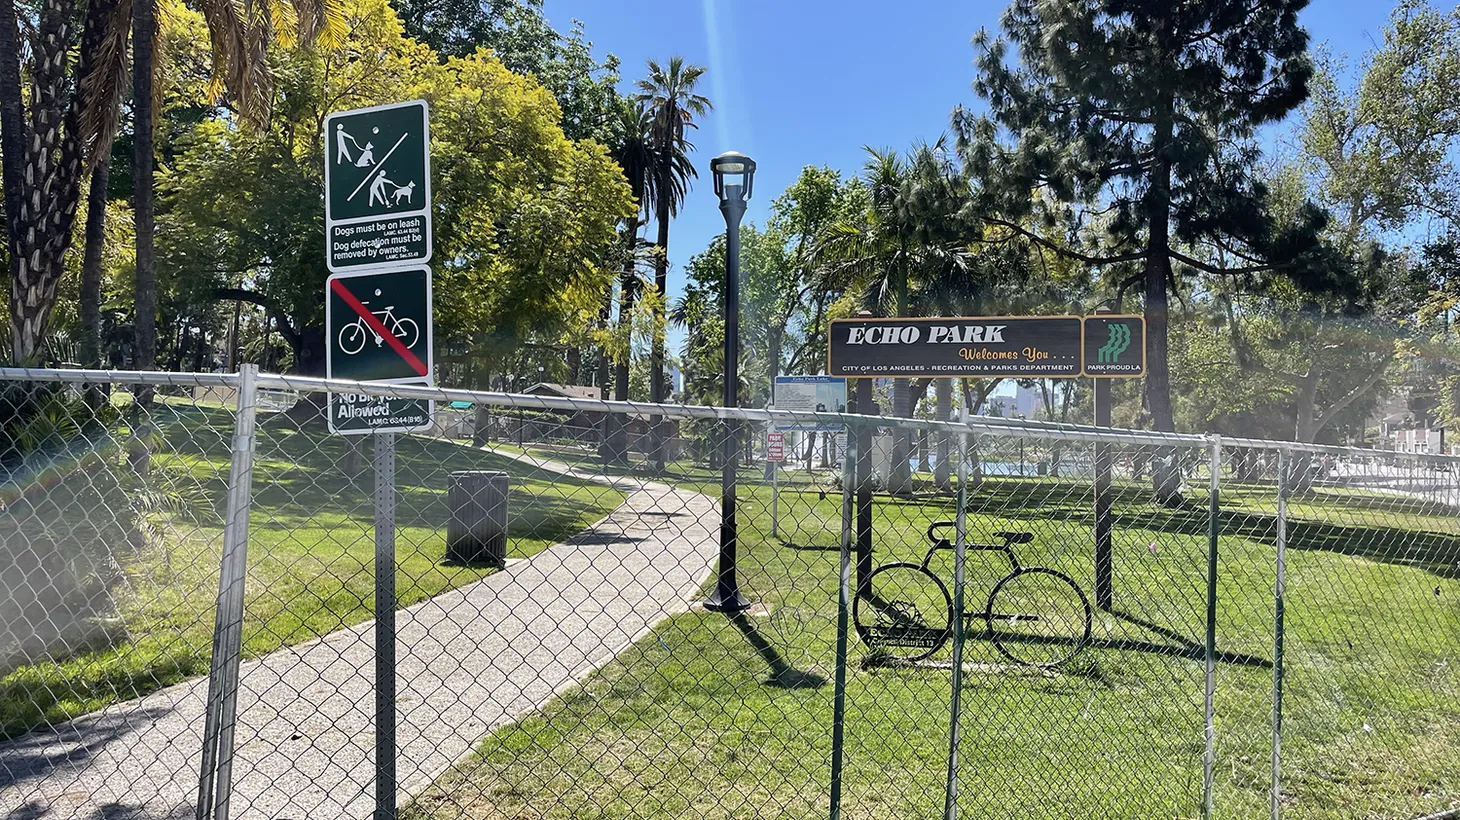 The chain link fence remains at Echo Park Lake in March 2022, one year after it was erected in an effort to clear a large homeless encampment.